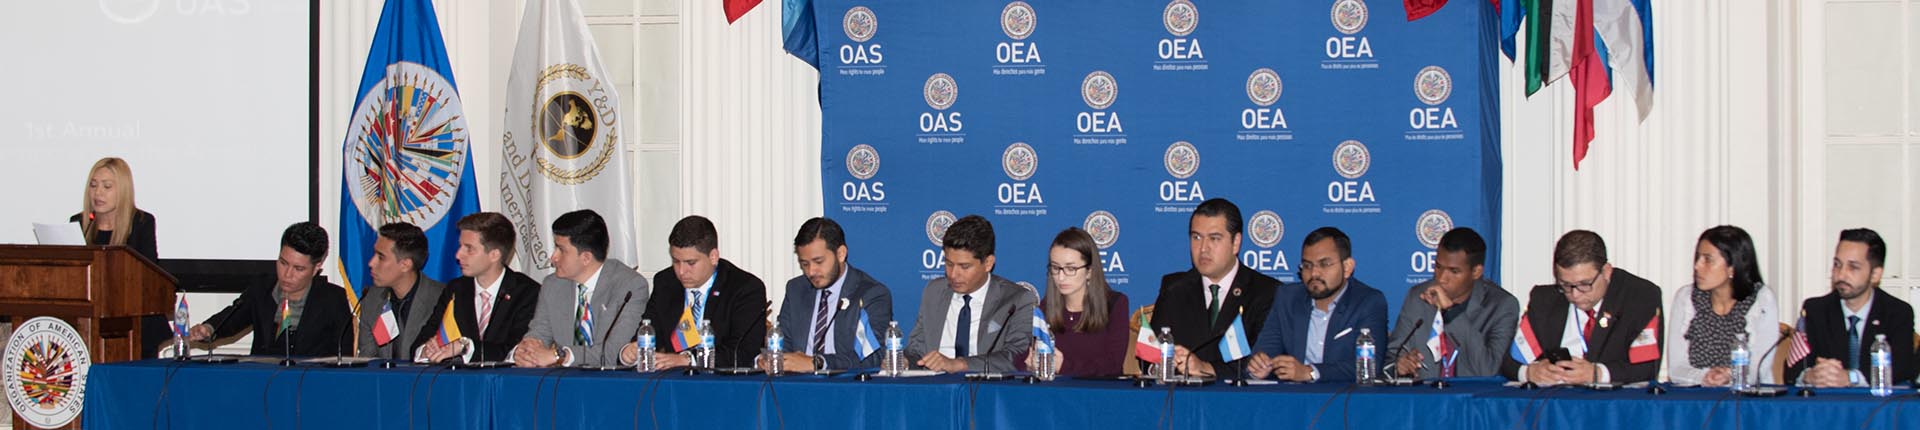 Participants of the 2019 Youth and Democracy in the Americas summit